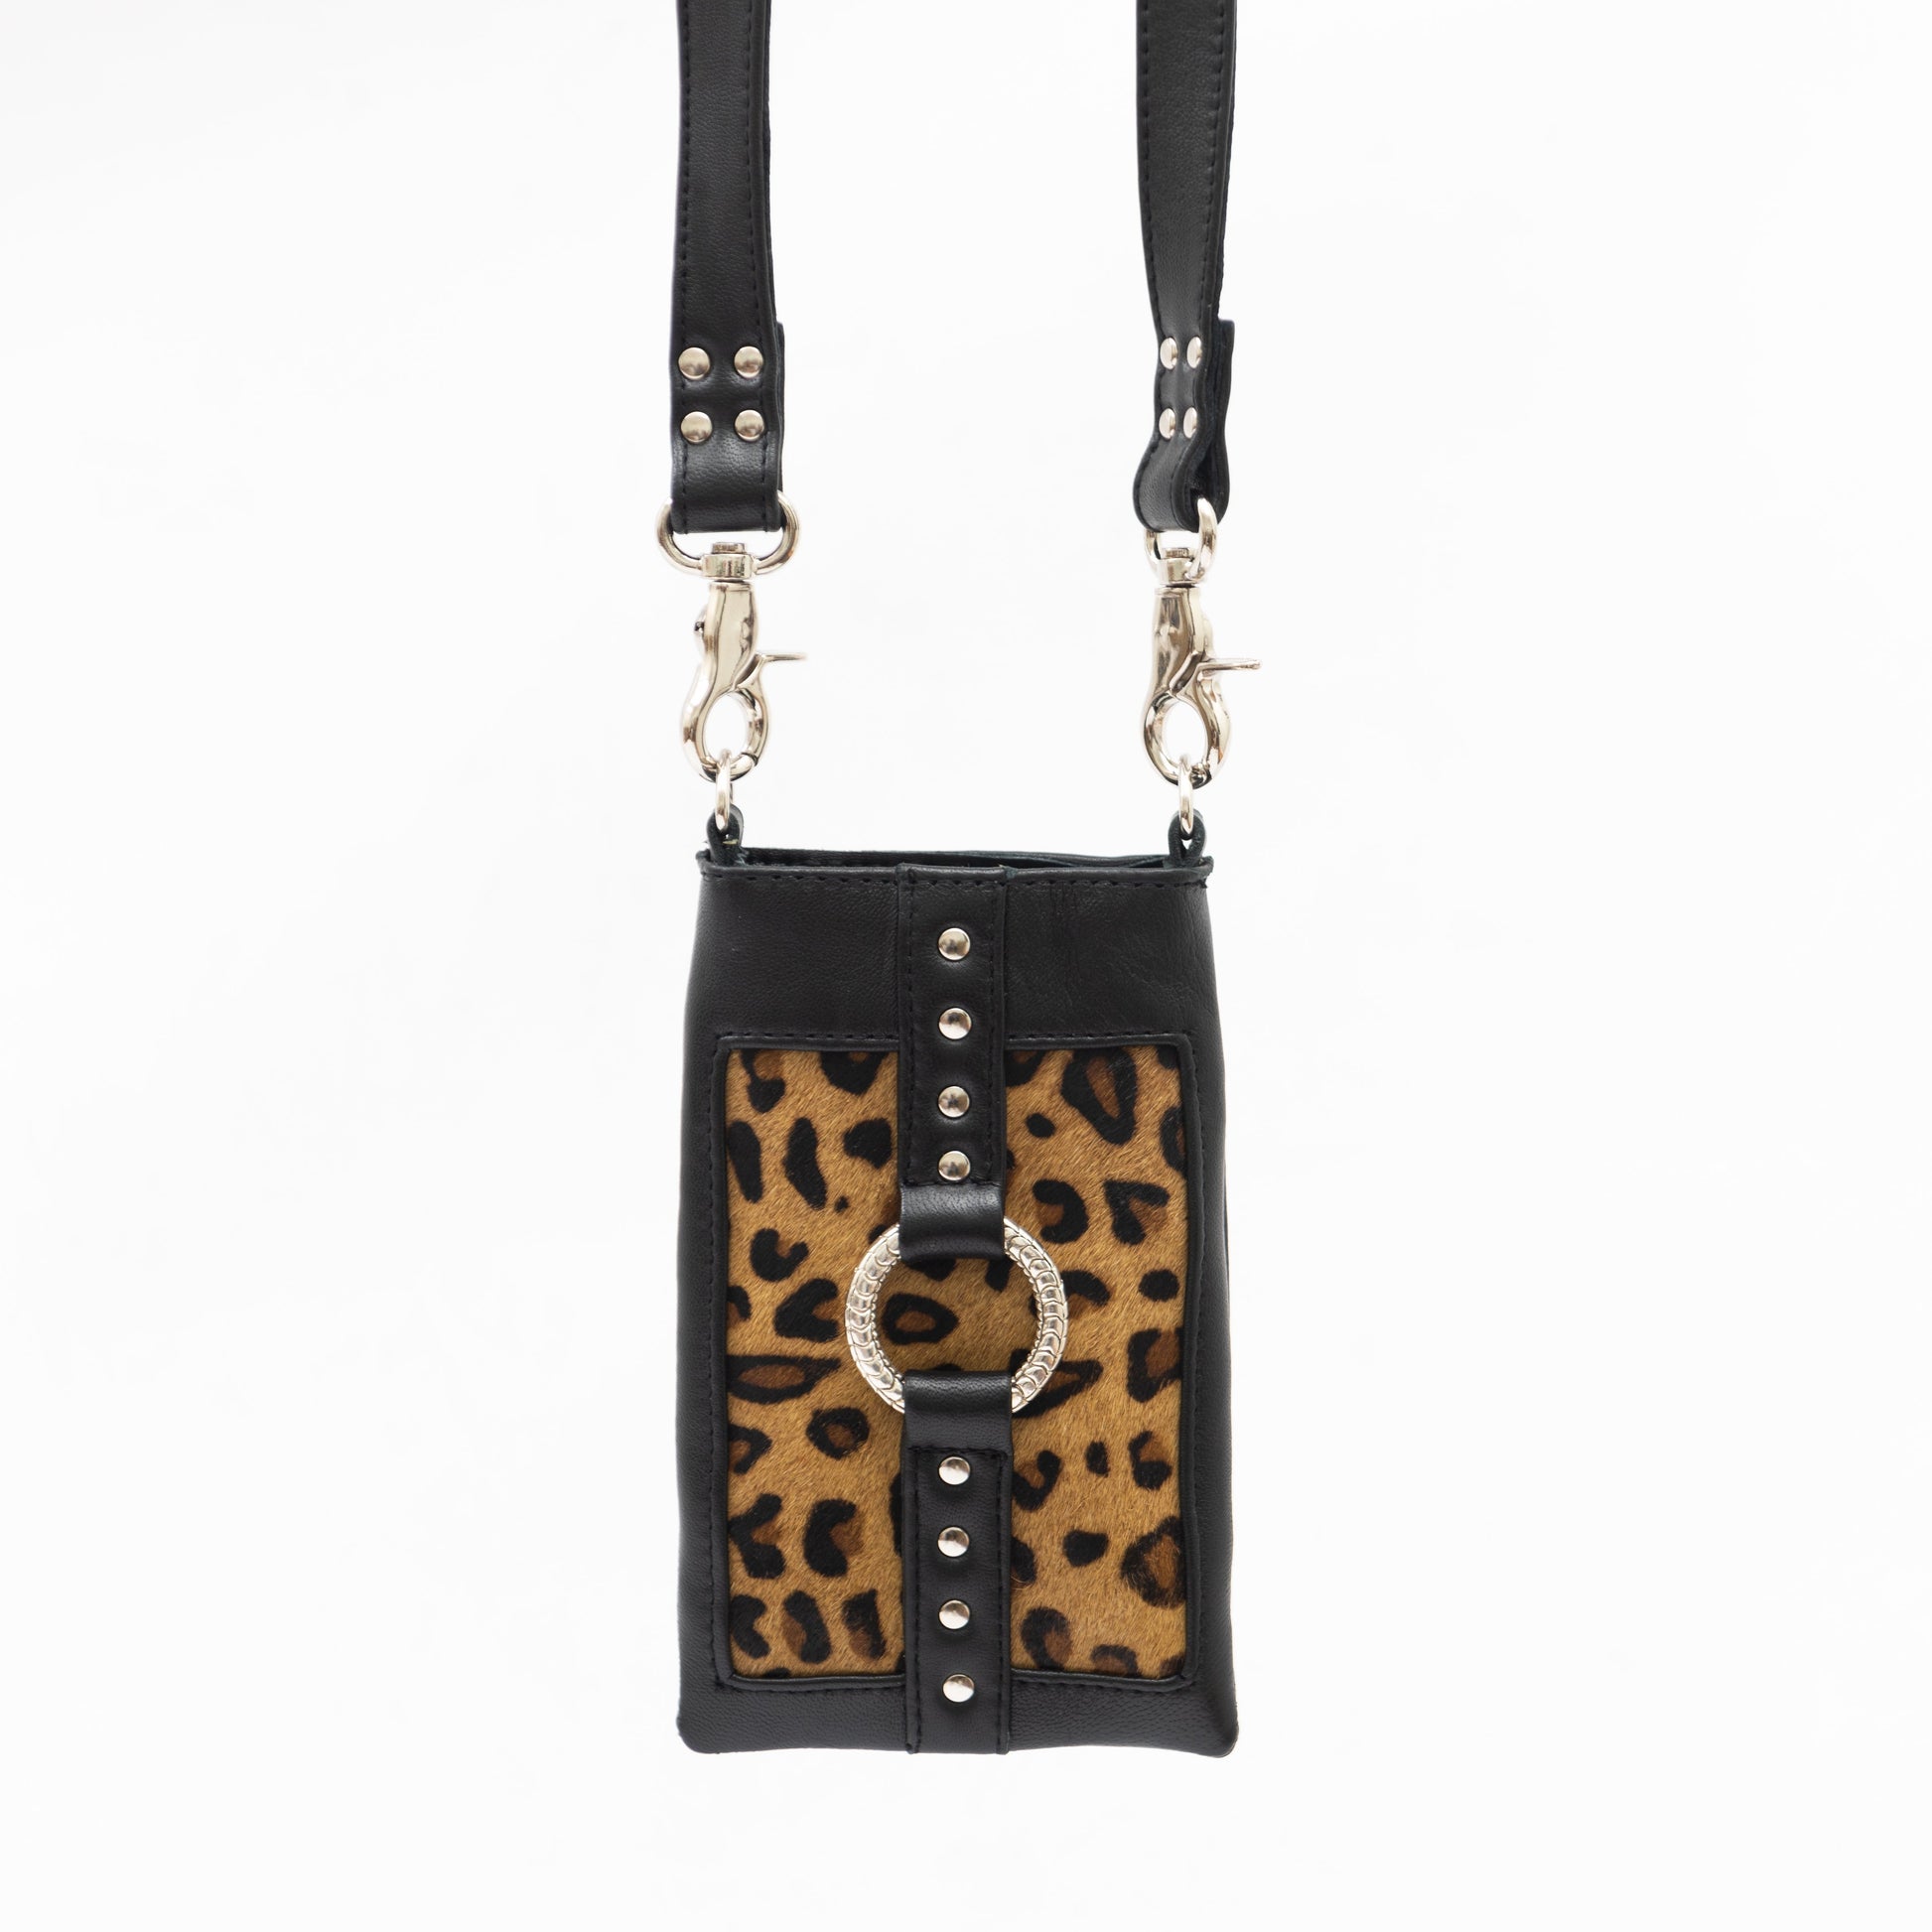 black leather and leopard print crossbody phone carry bag with silver hardware and adjustable shoulder strap, Australia designer mobile phone pouch, perfect for iPhone and festival bag